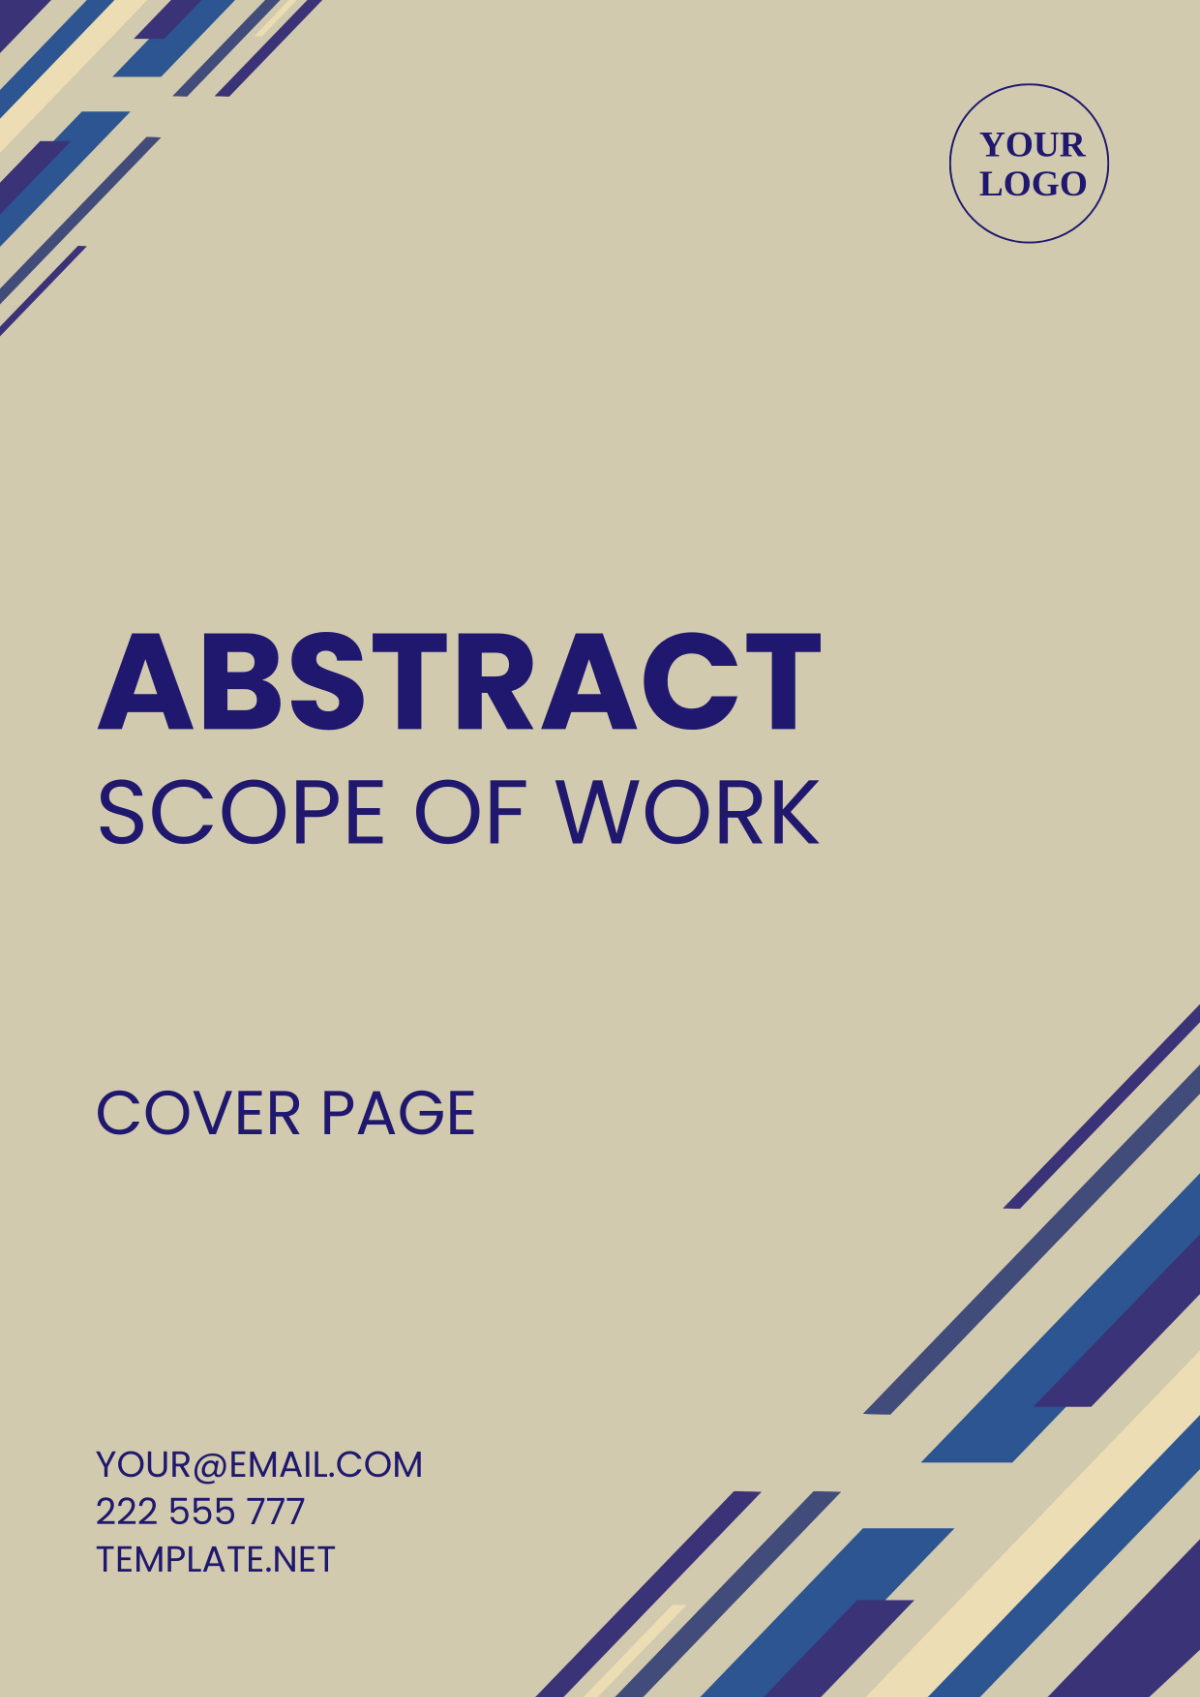 Abstract Scope of Work Cover Page